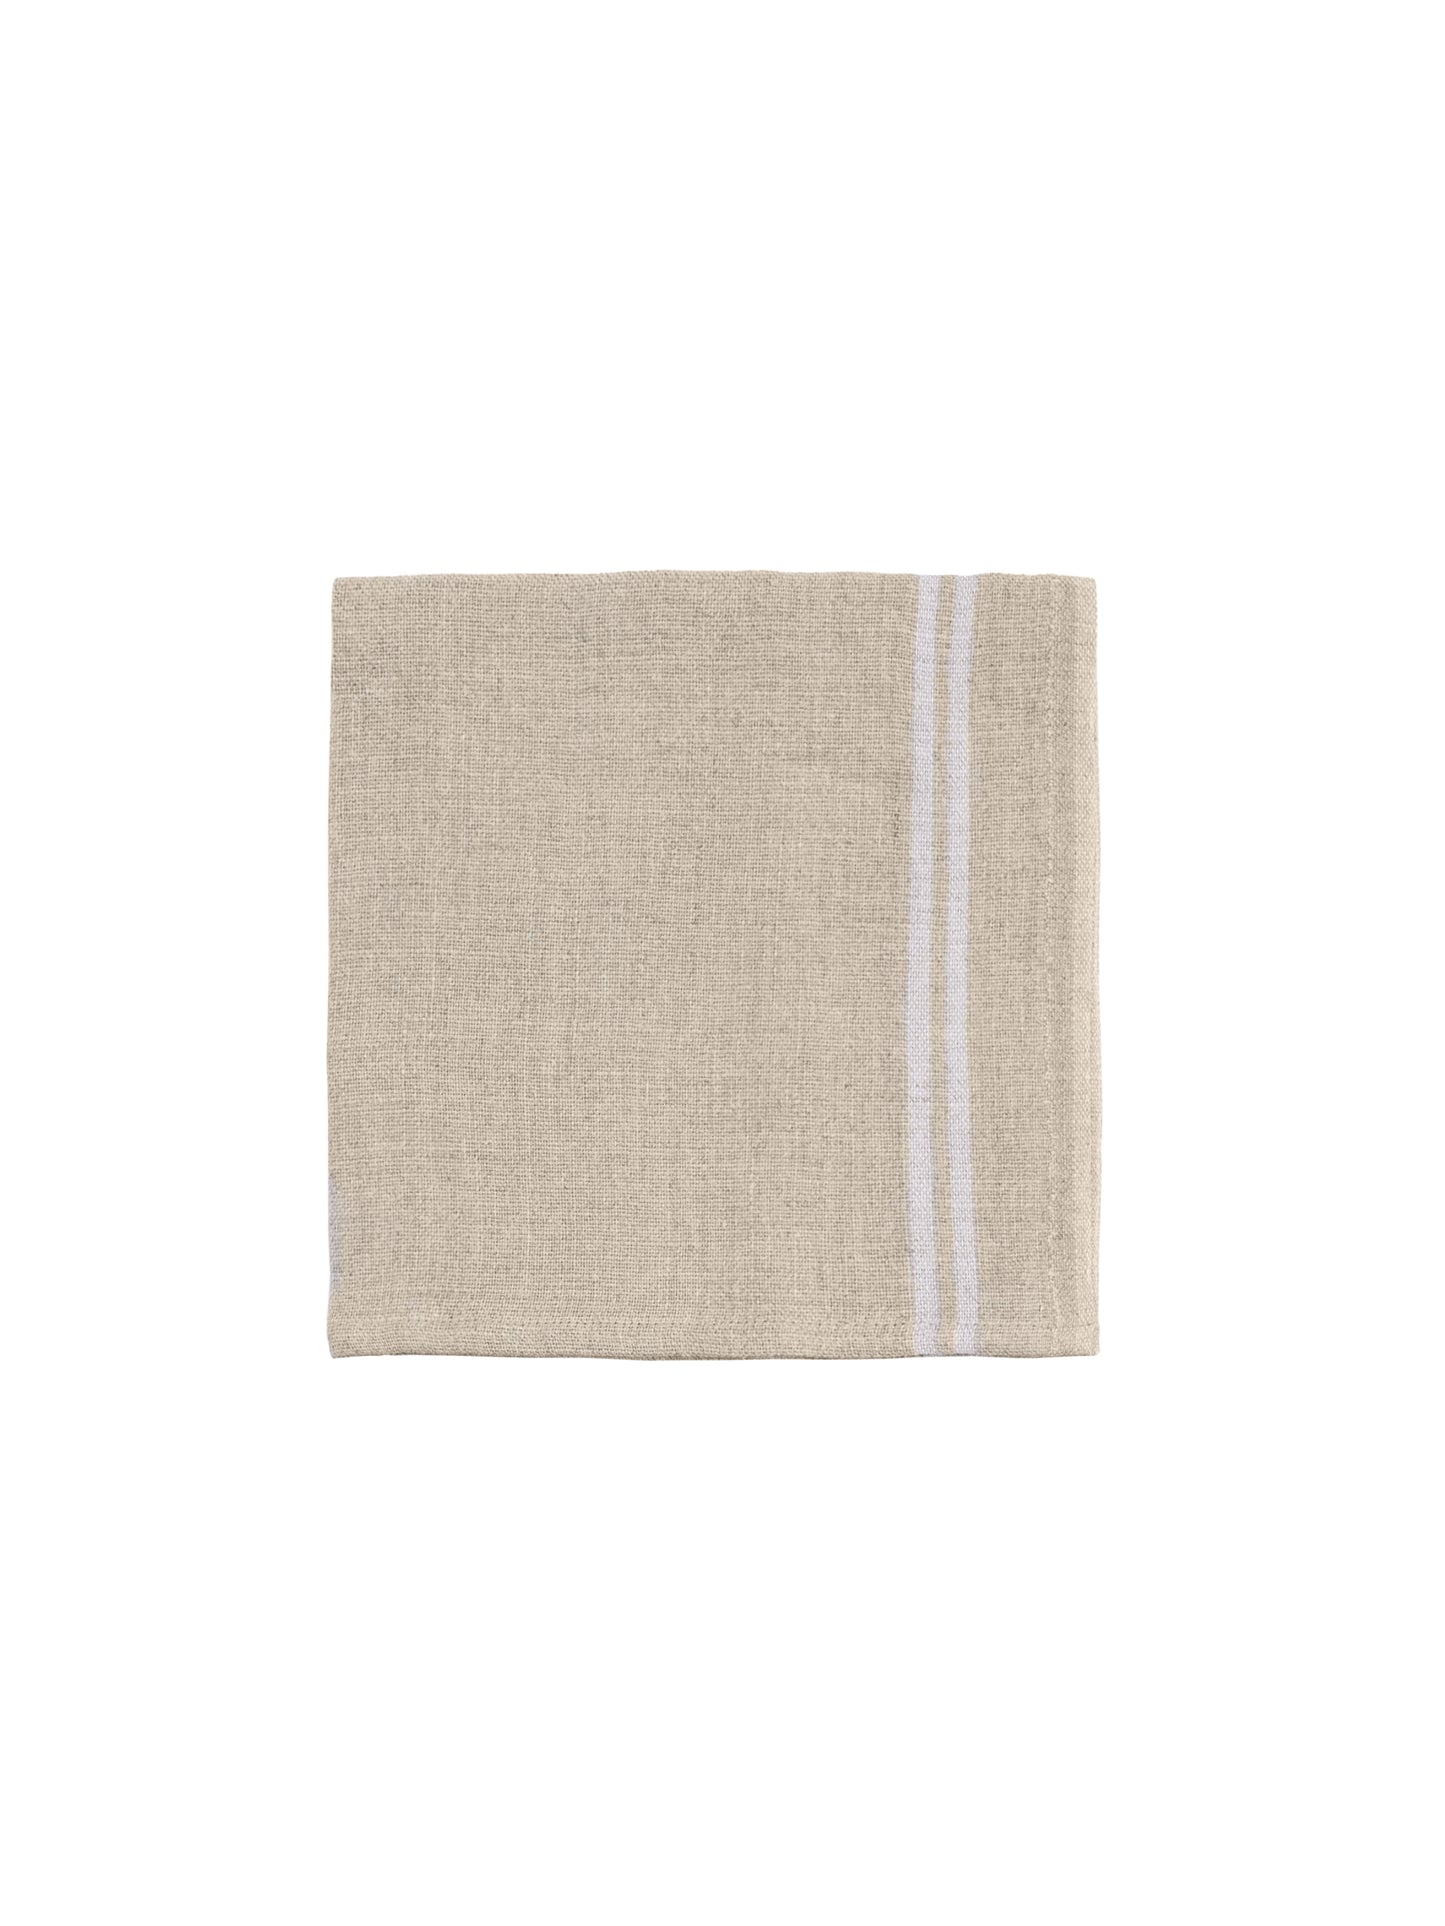 Charvet Editions Country Linen Collection White Napkins Weston Table